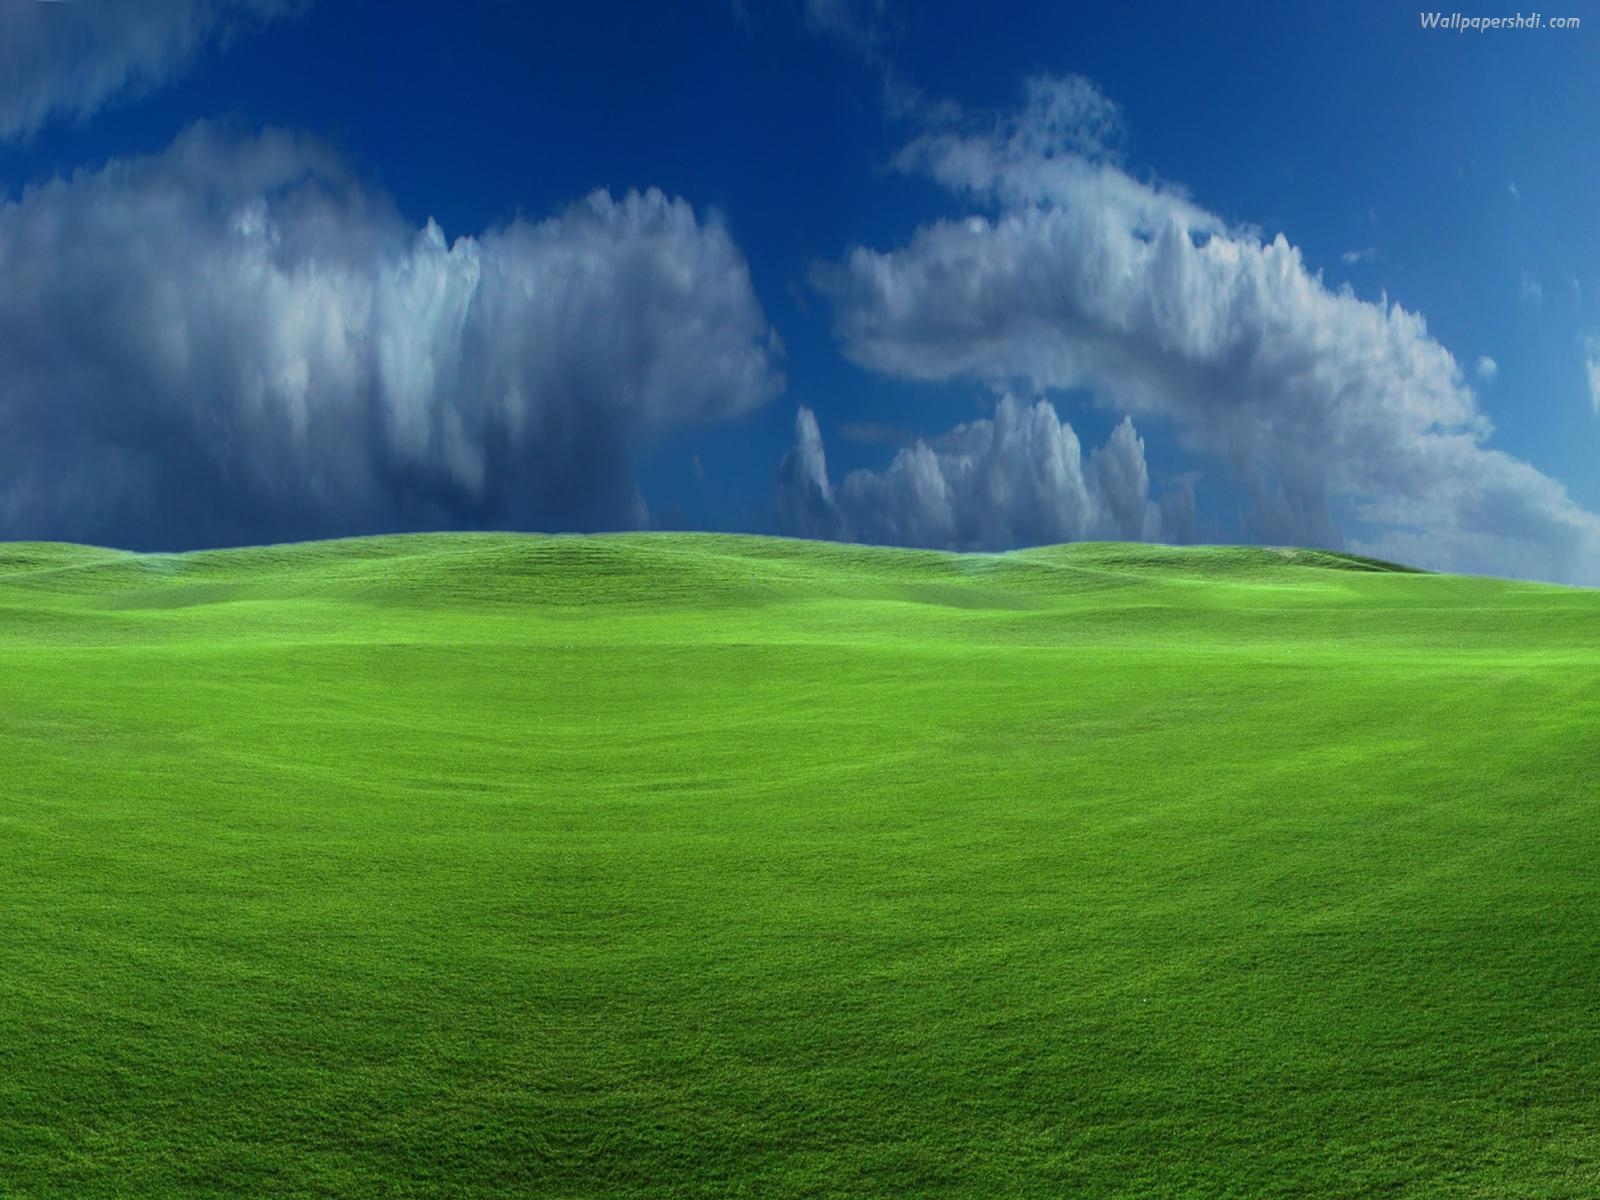 Wallpapers Windows Xp Storm Hd For Free Backgrounds 1600x1200